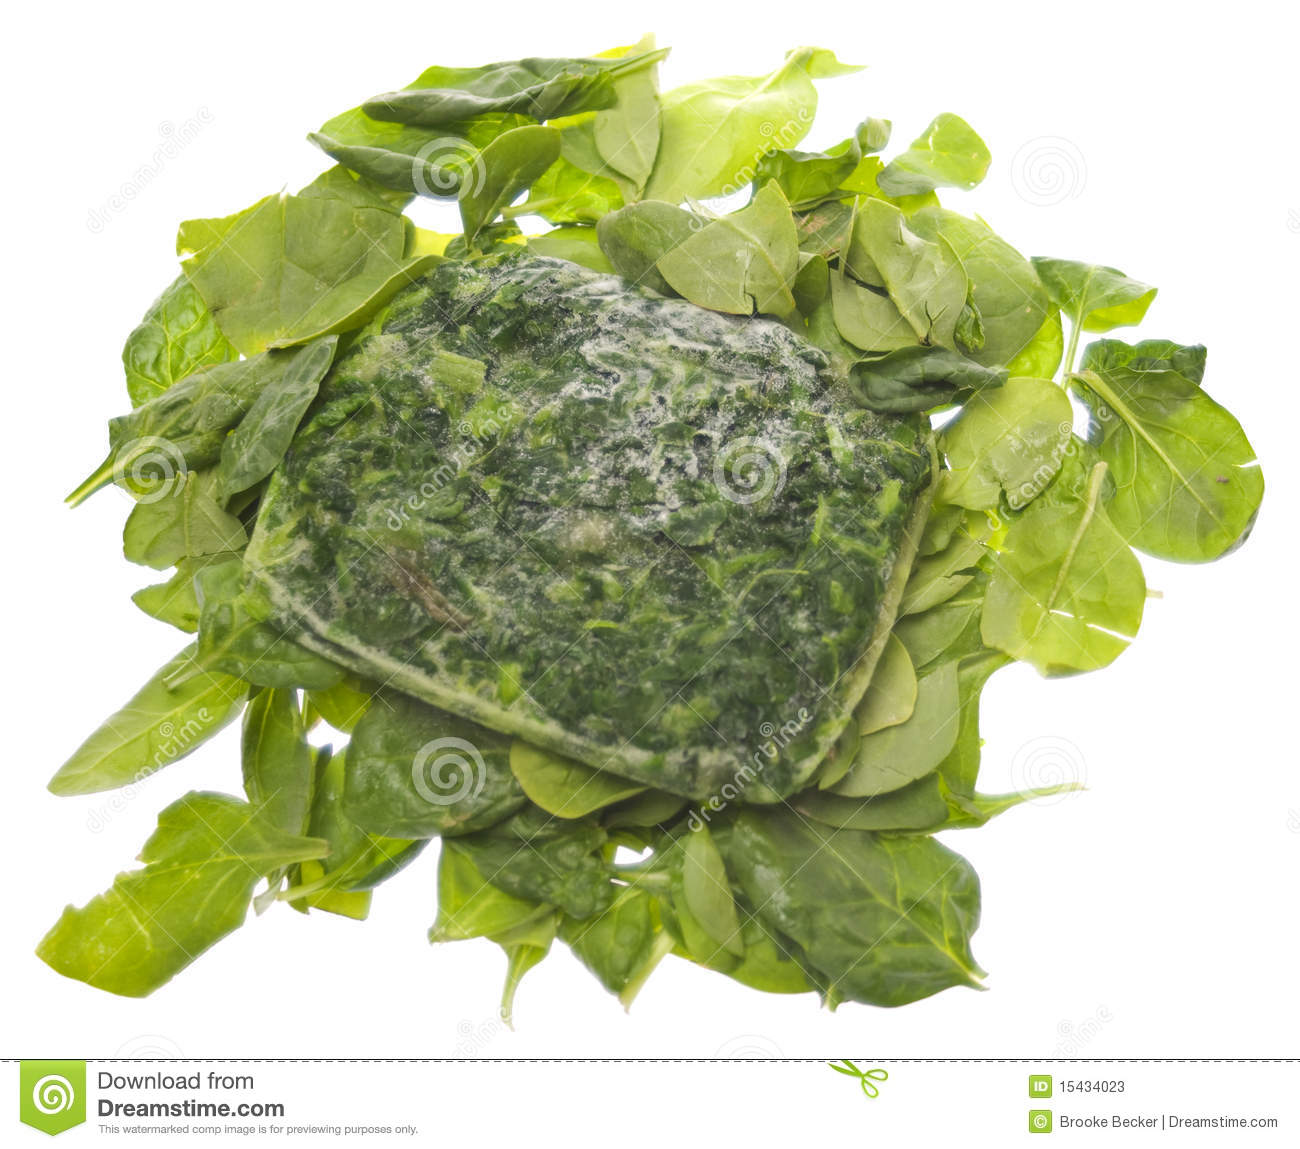 Frozen Spinach Stock Photos, Images, & Pictures.